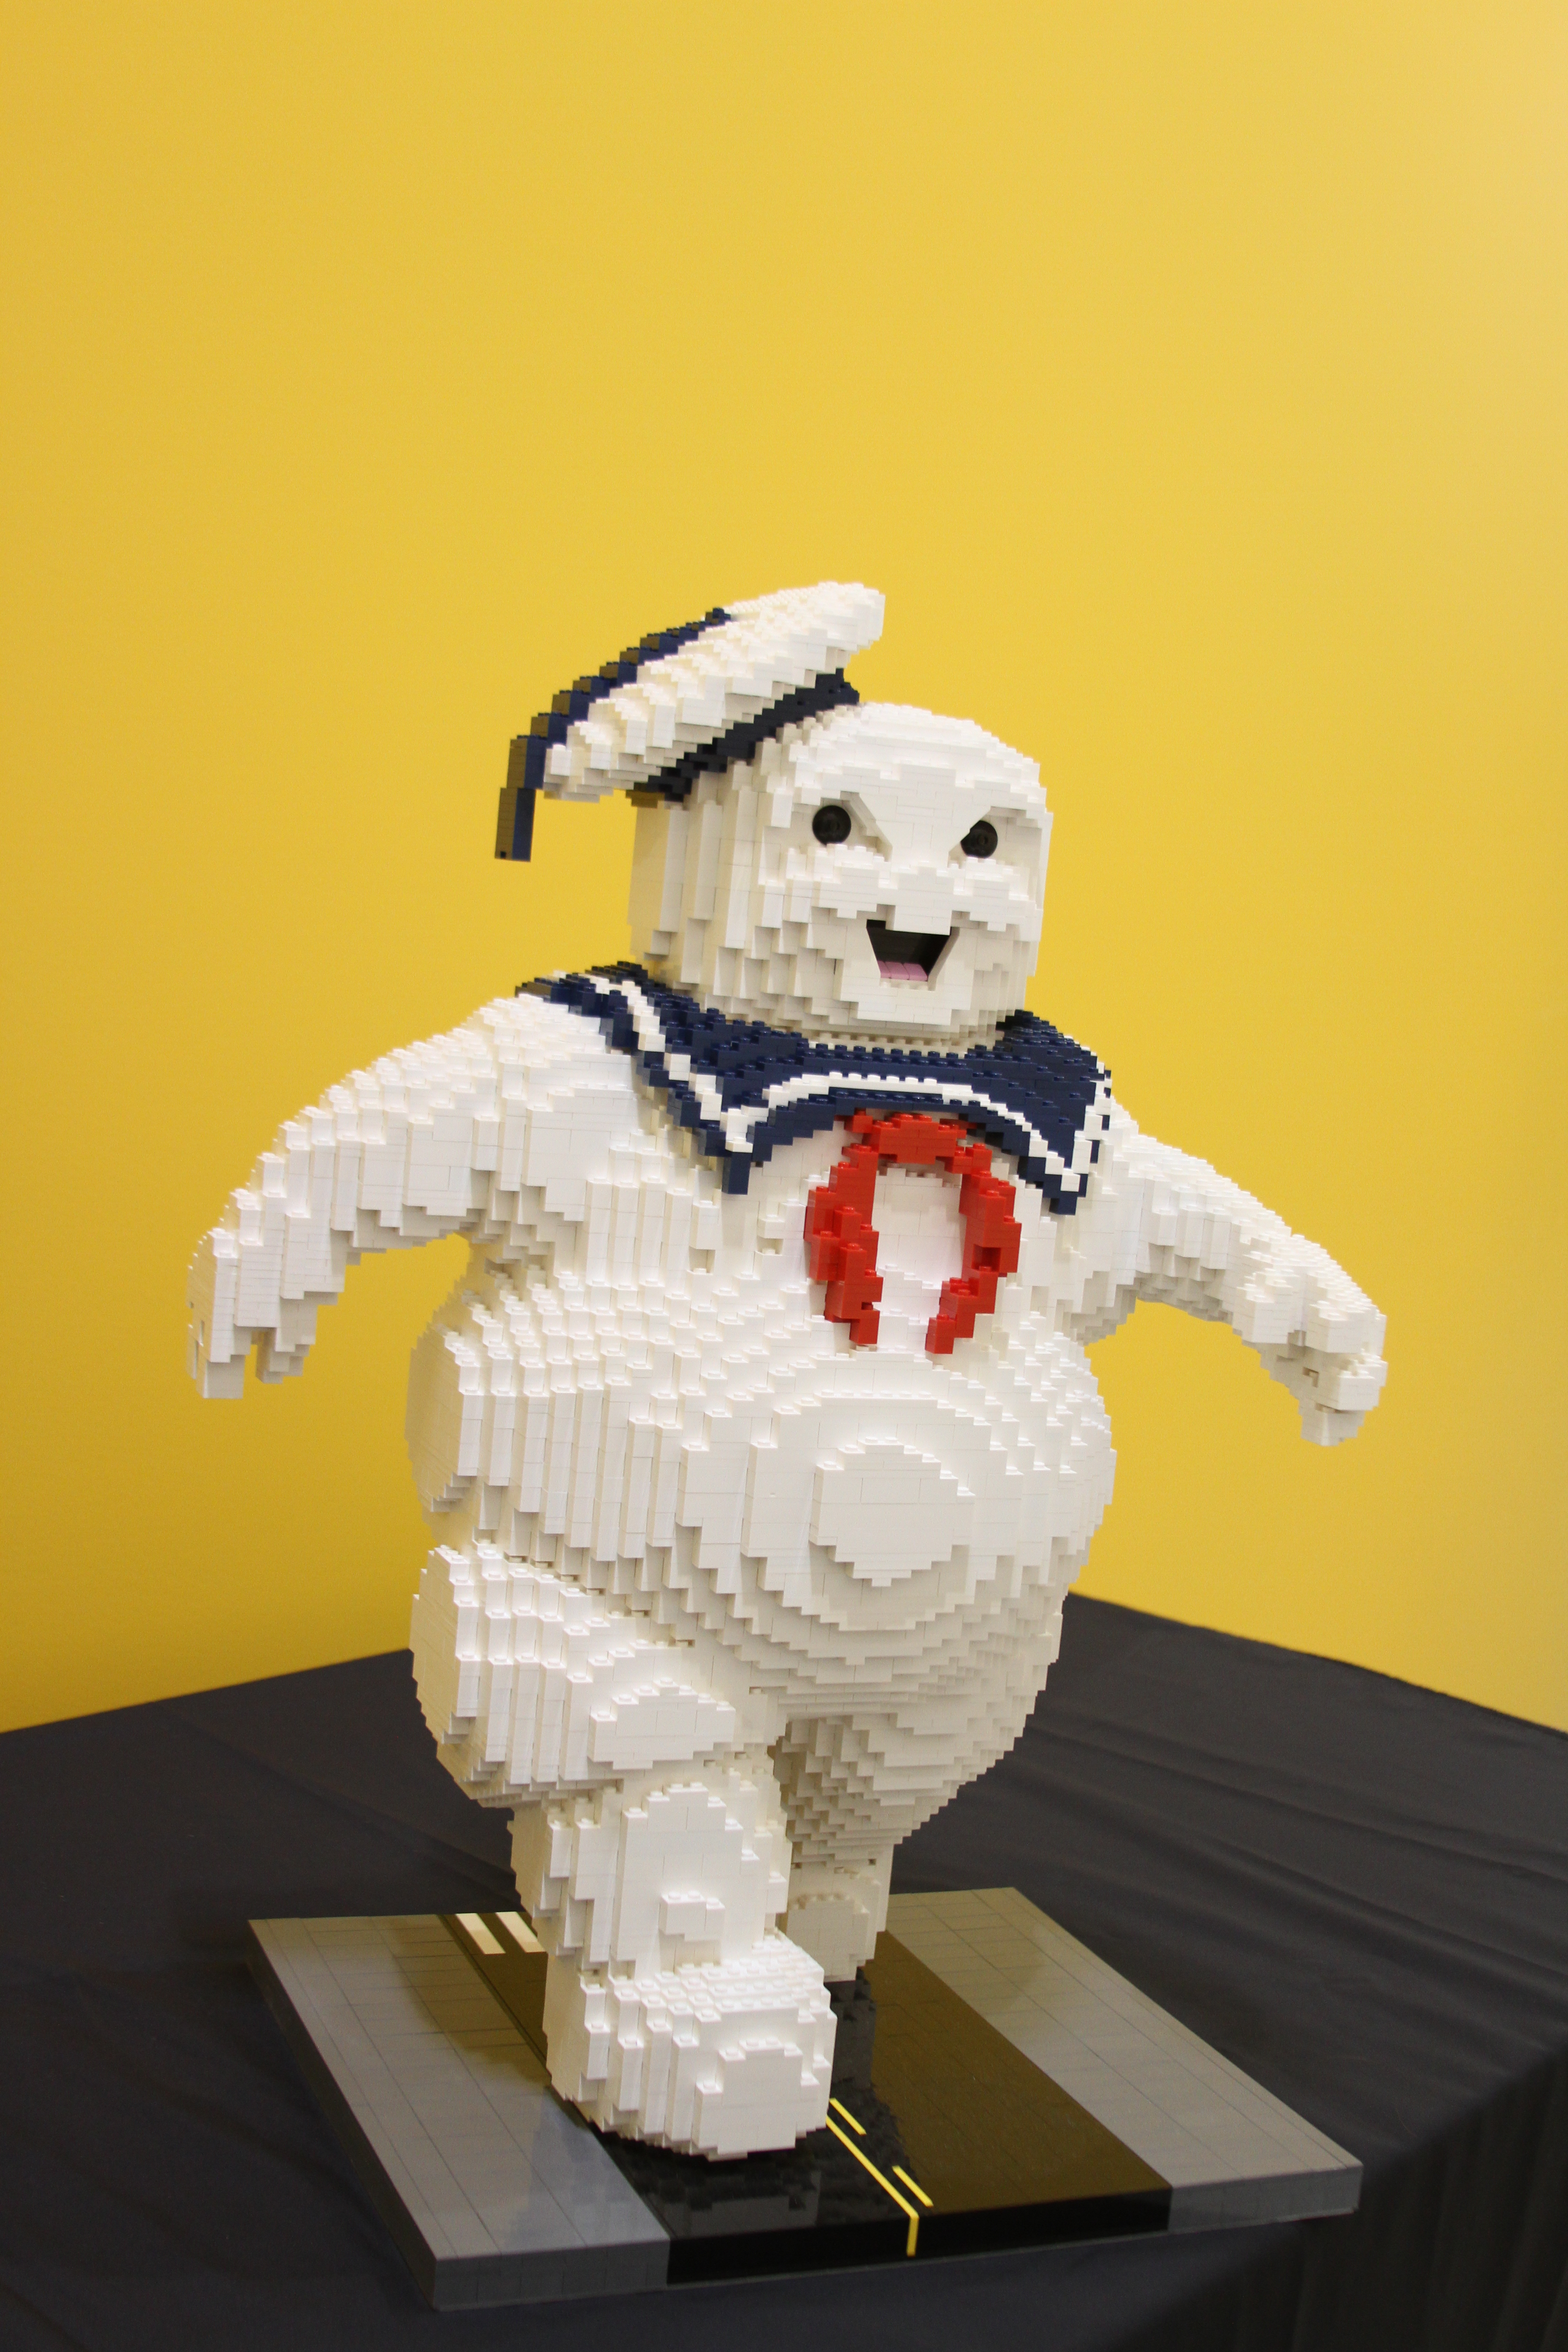 SDCC] LEGO Stay Puft Marshmallow Man Statue to Debut at Comic Con - FBTB